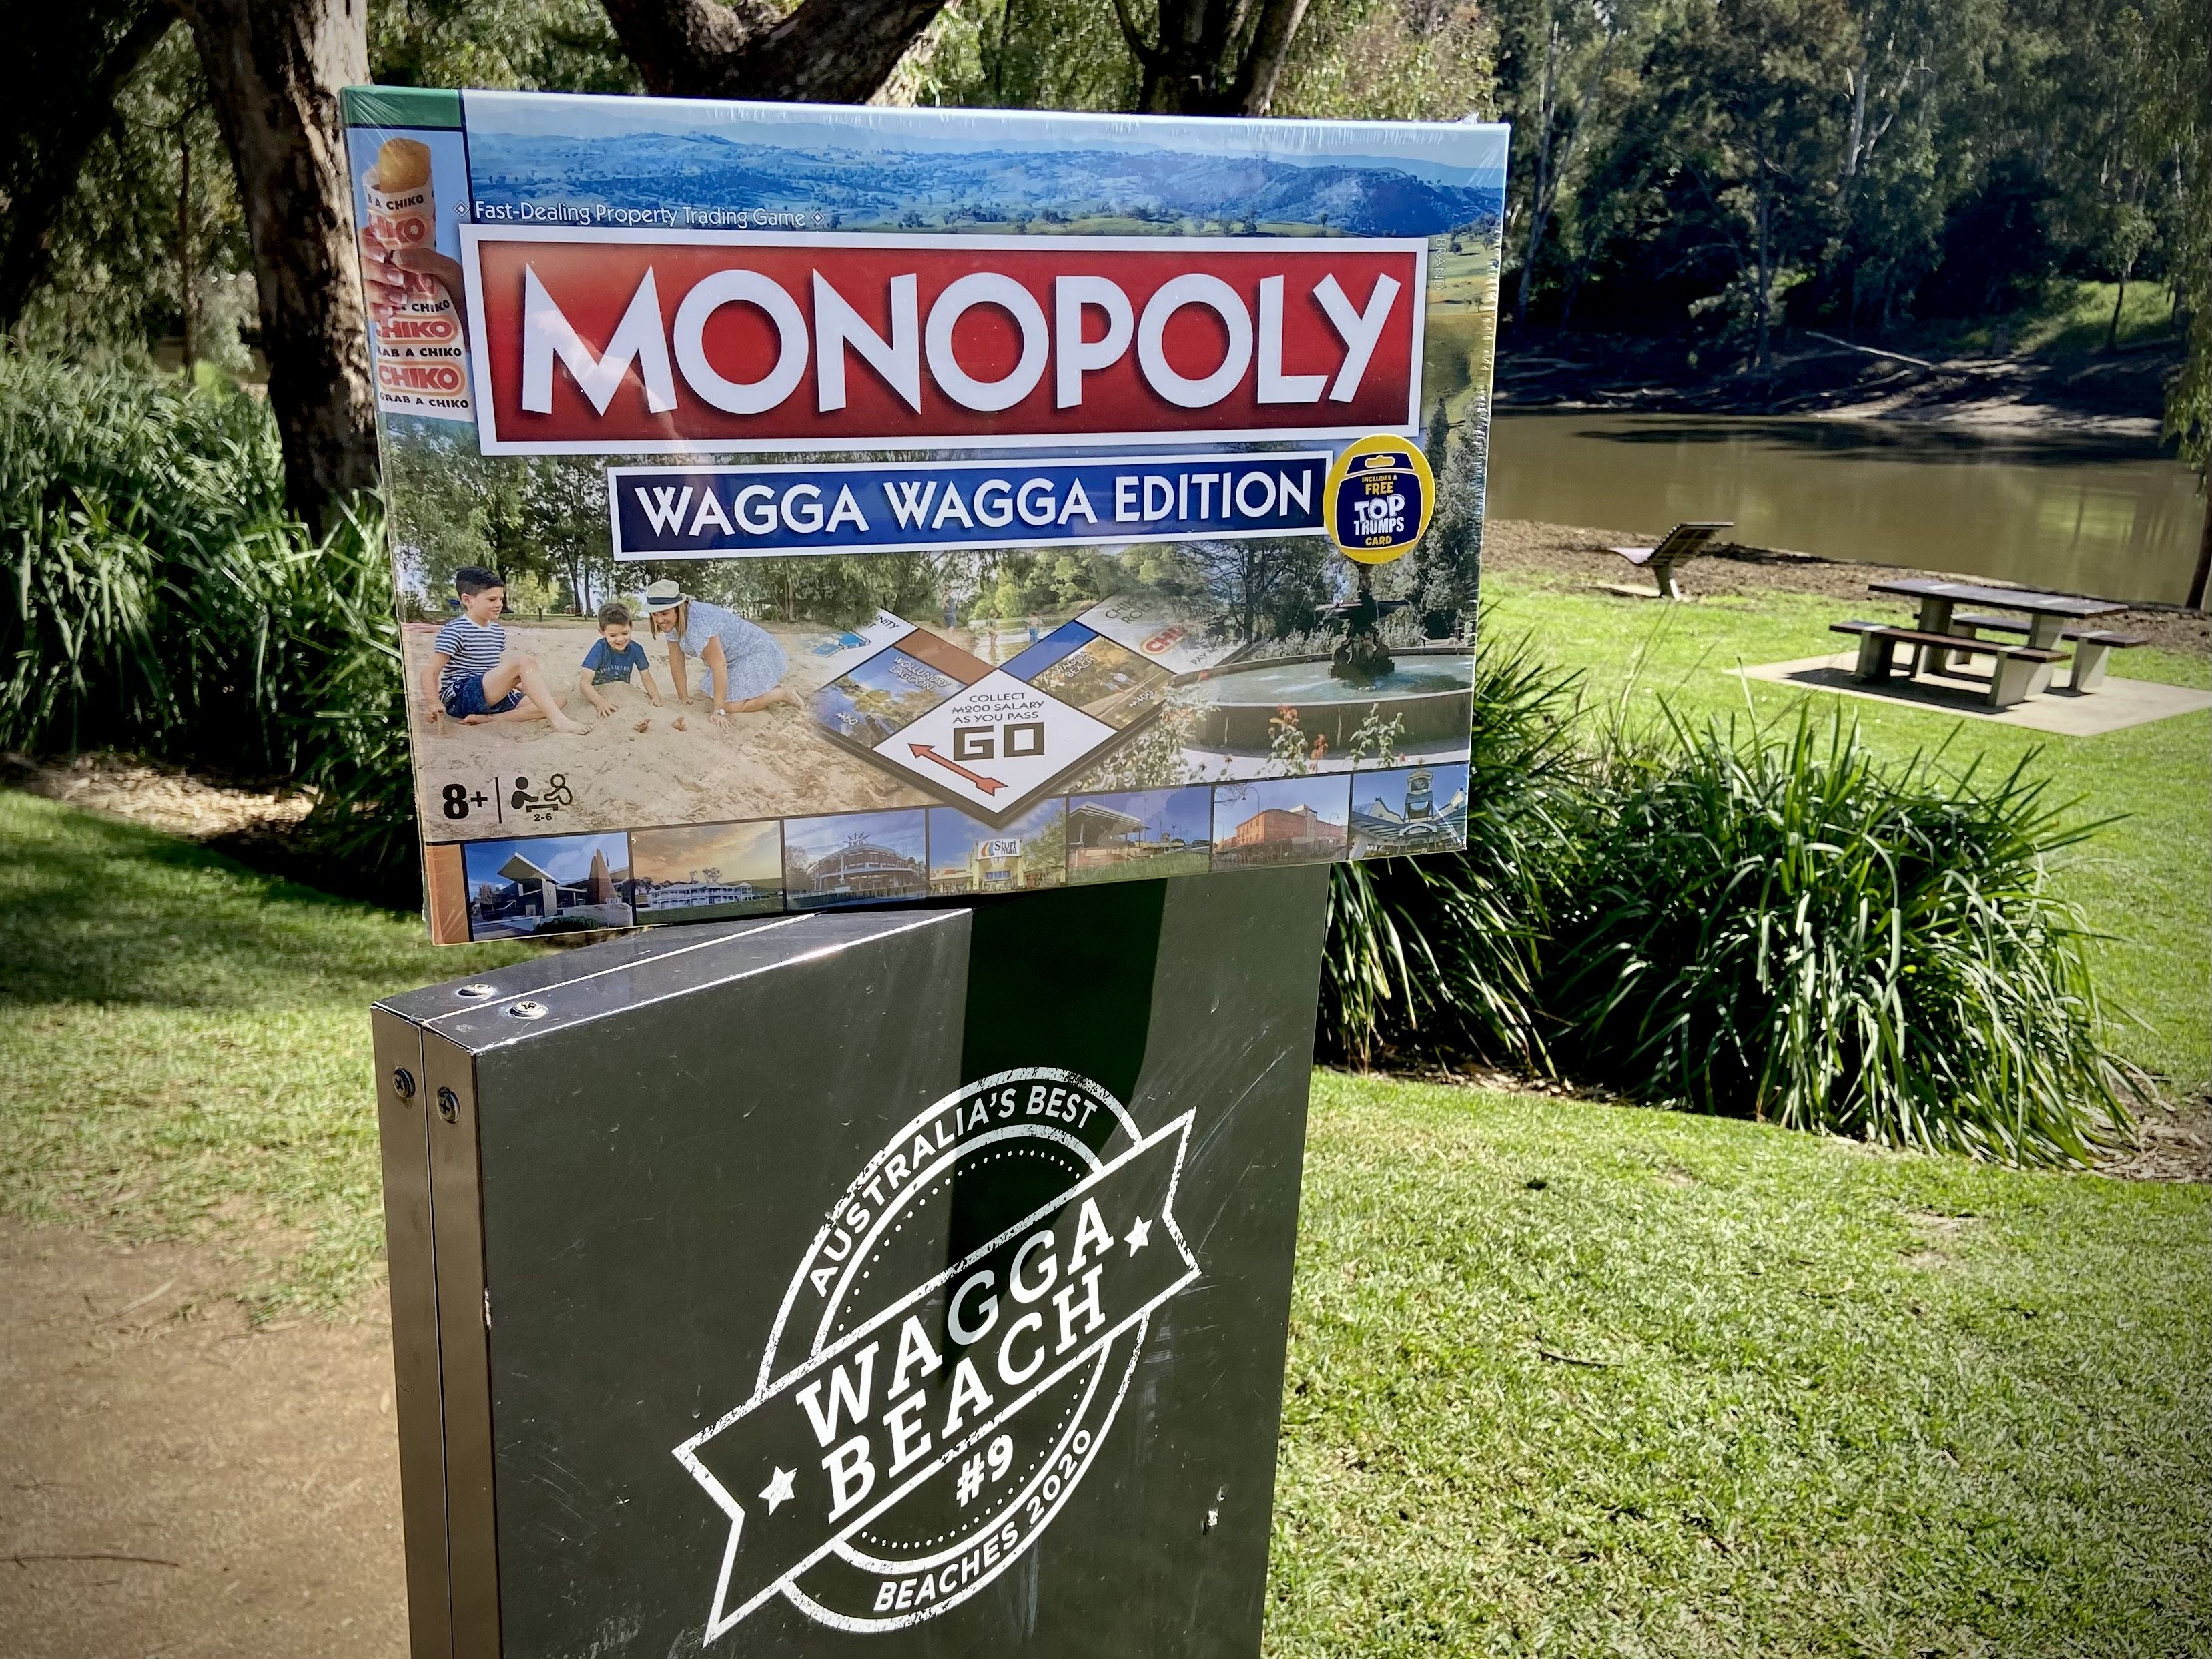 Wagga plays for keeps with the first Monopoly regional edition